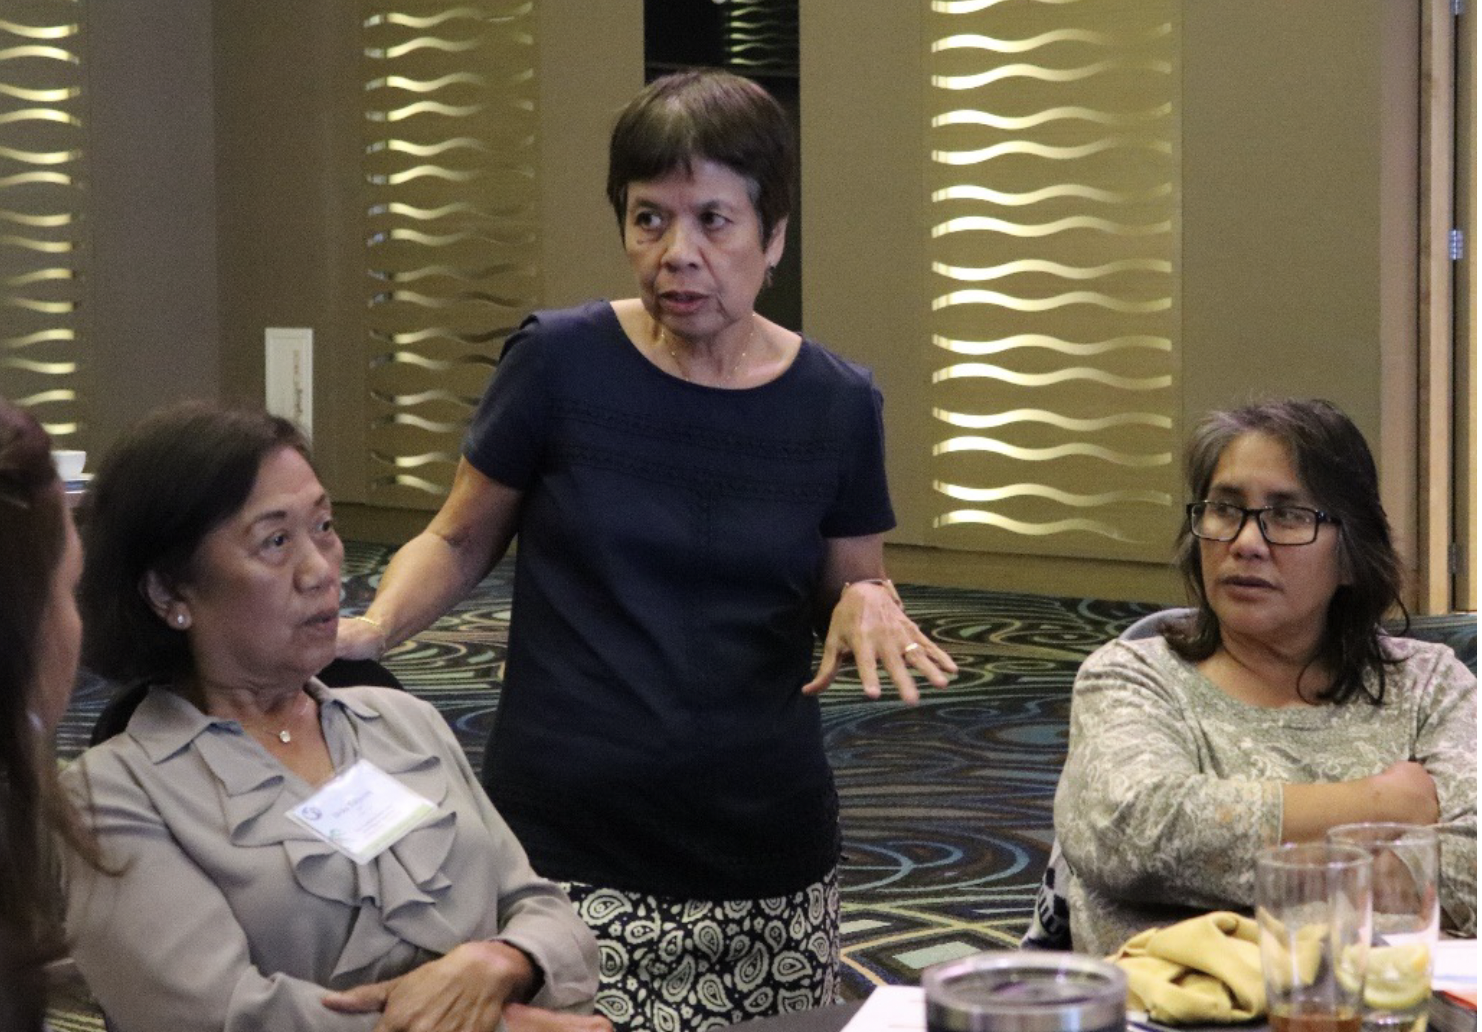 Nieves Flores, EdD, Consultant, Guam CEDDERS, (standing) pictured with Chief Brodie Memorial Elementary School’s faculty (left to right) Delia Taijeron, teacher and Celeste Lizama, teacher.